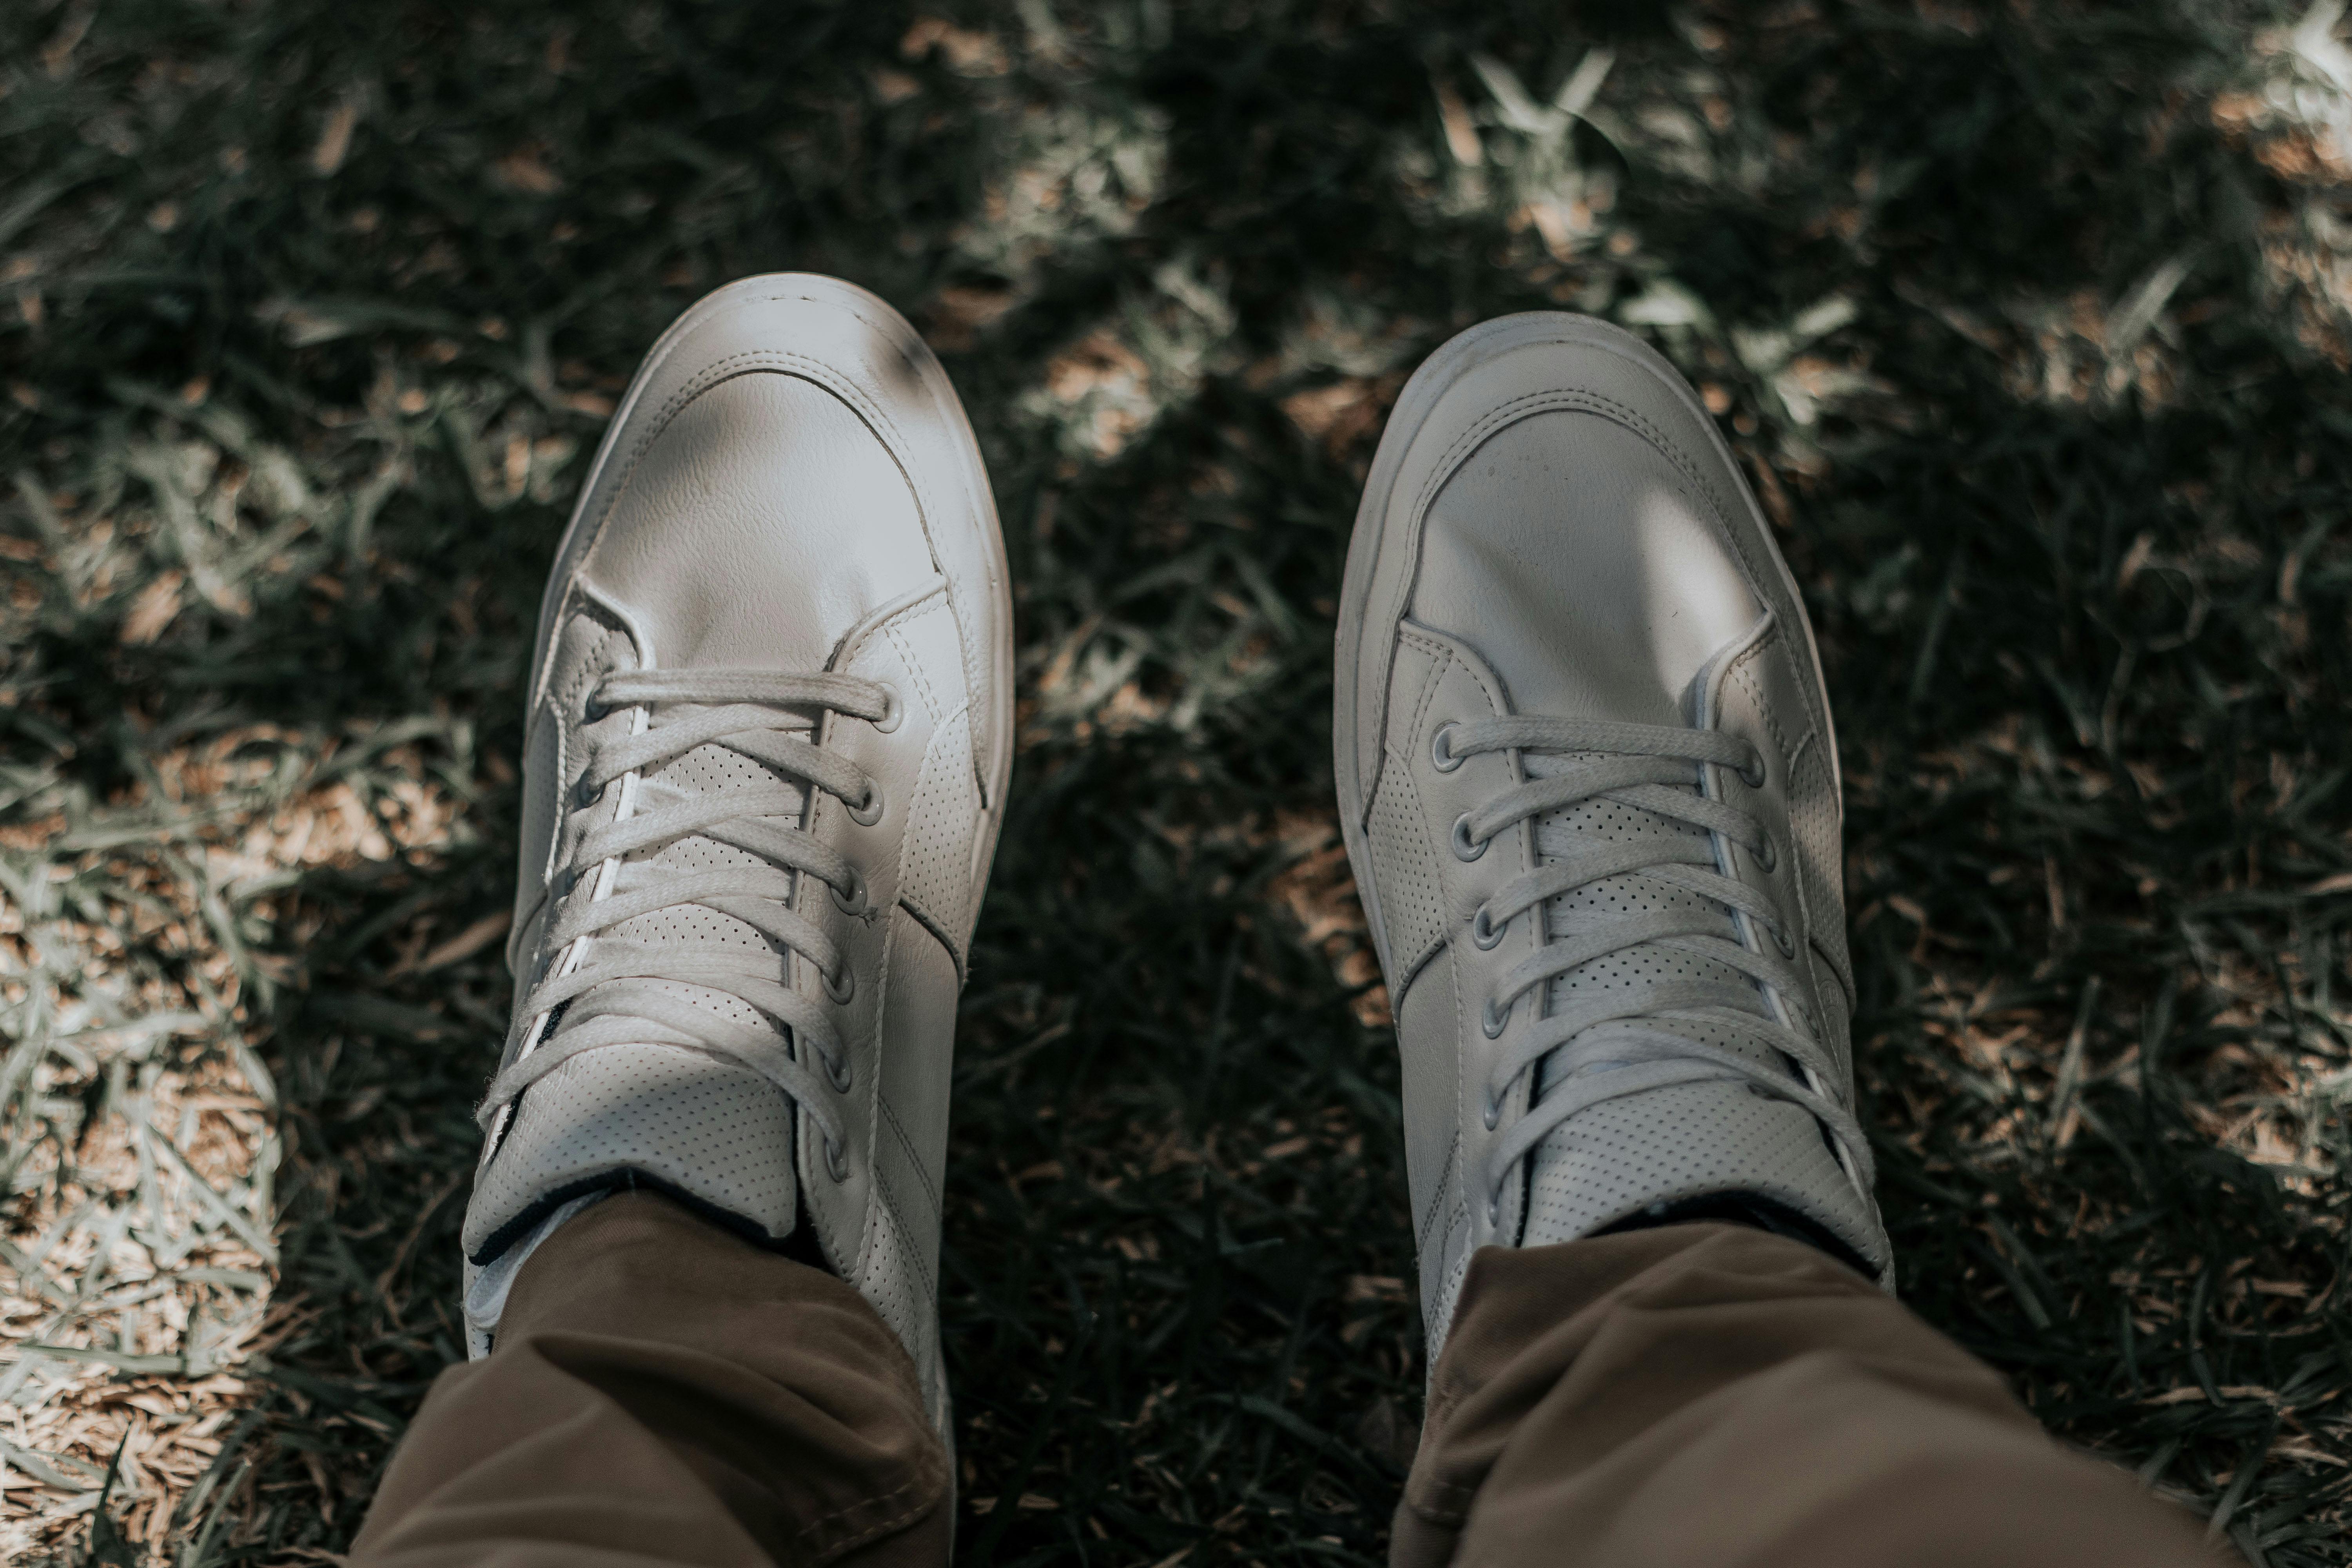 Person Wearing White Shoes · Free Stock Photo